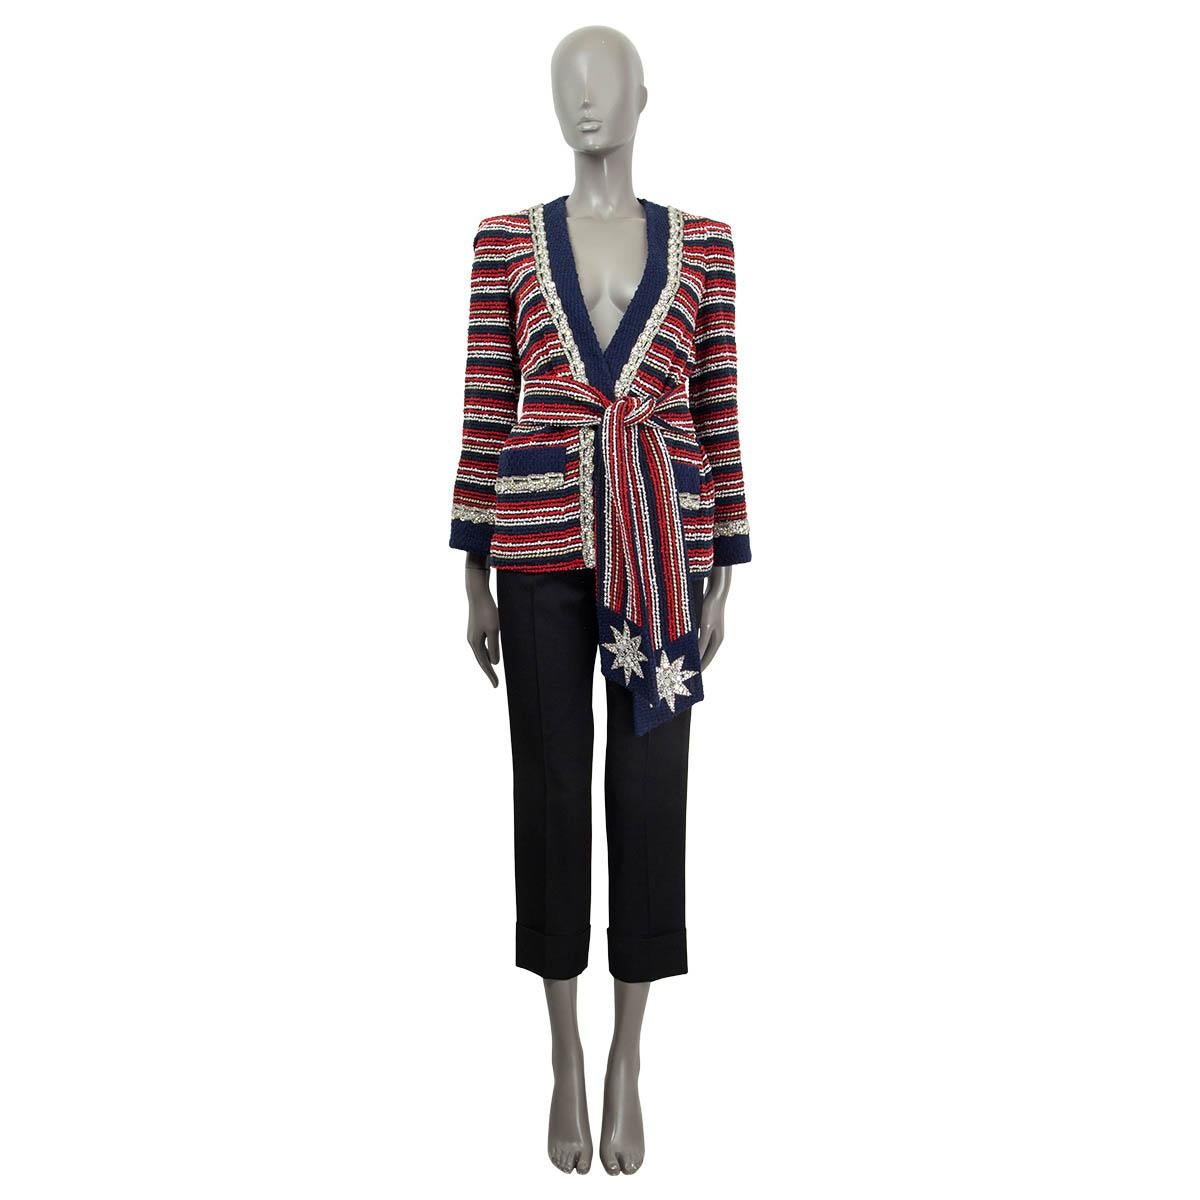 100% authentic Gucci  belted marine stripe bouclé jacket in navy, red, gold and white cotton (88%) and polyamide (12%). Lined in navy blue viscose (100%). The jacket closes with a crystal star embellished belt and two hidden hooks. It features two